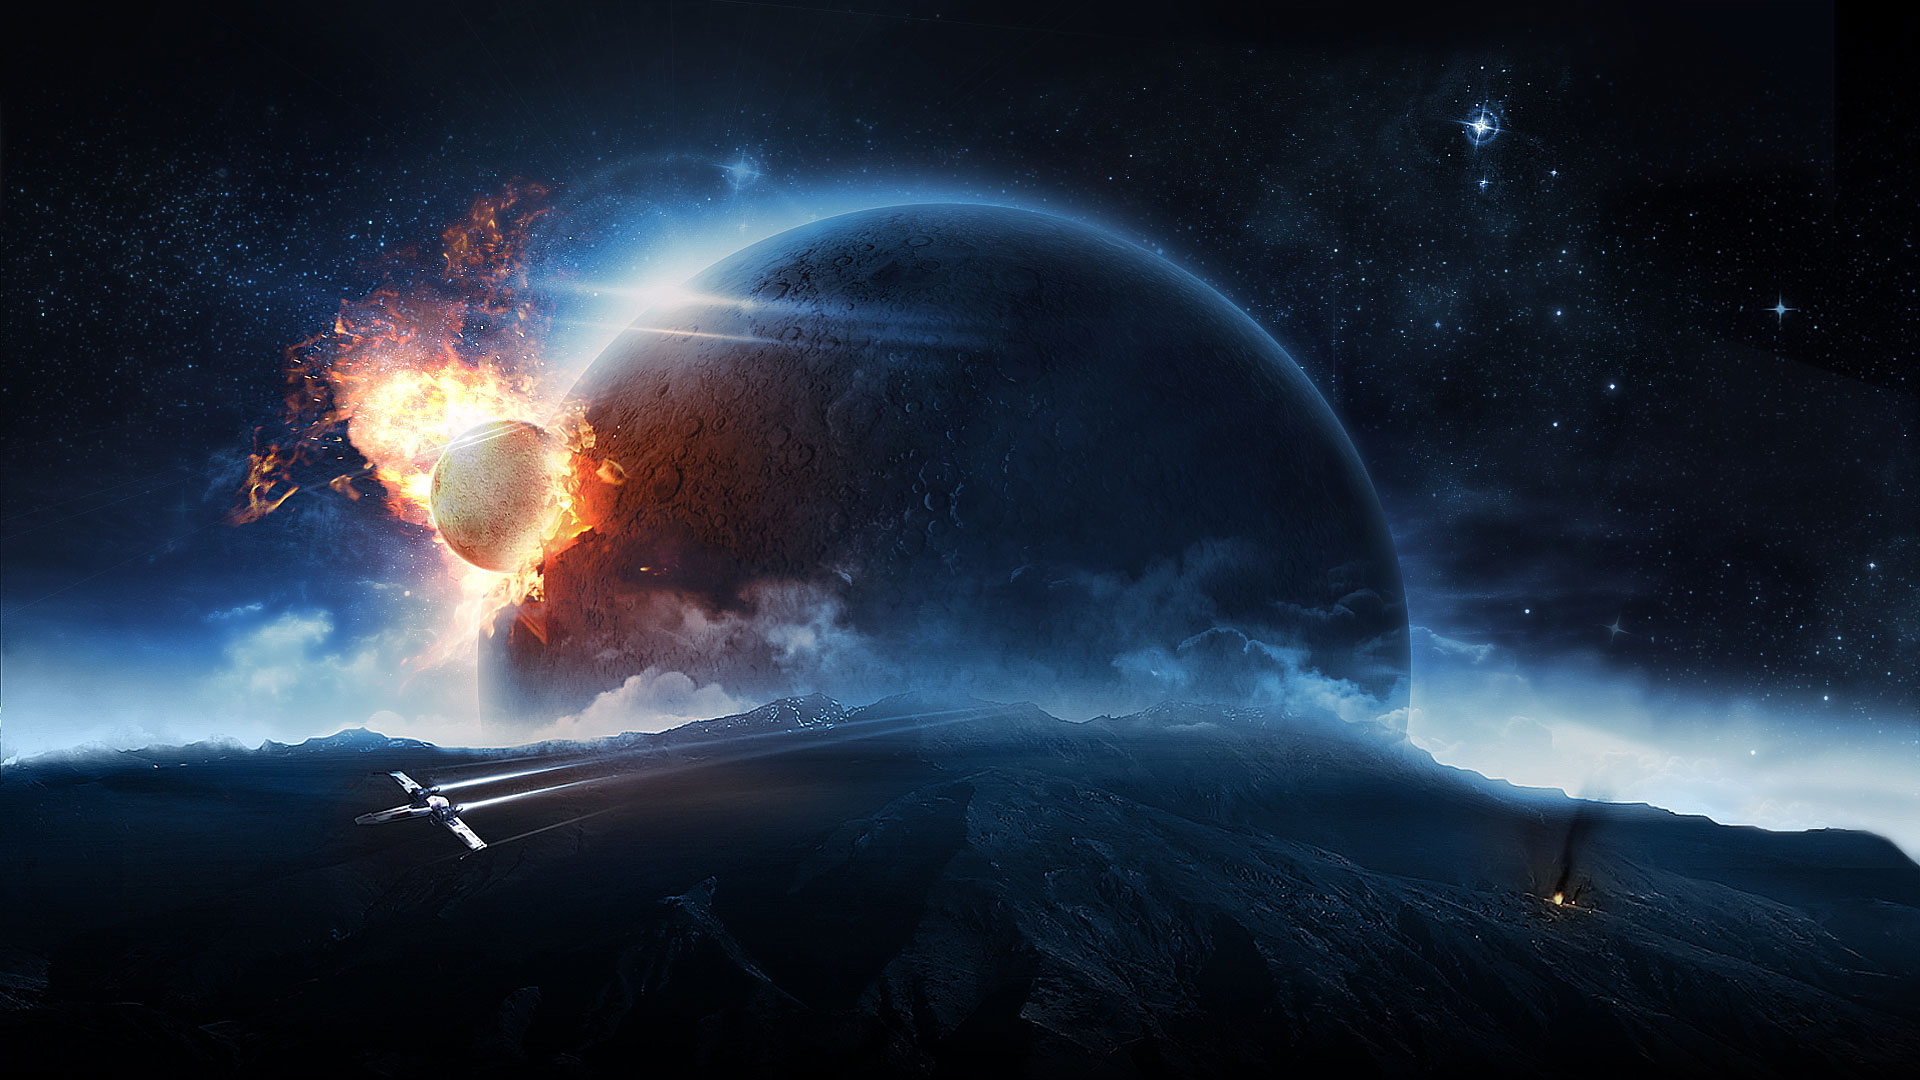 Download High Resolution Space Wallpapers Widescreen pictures in high 1920x1080